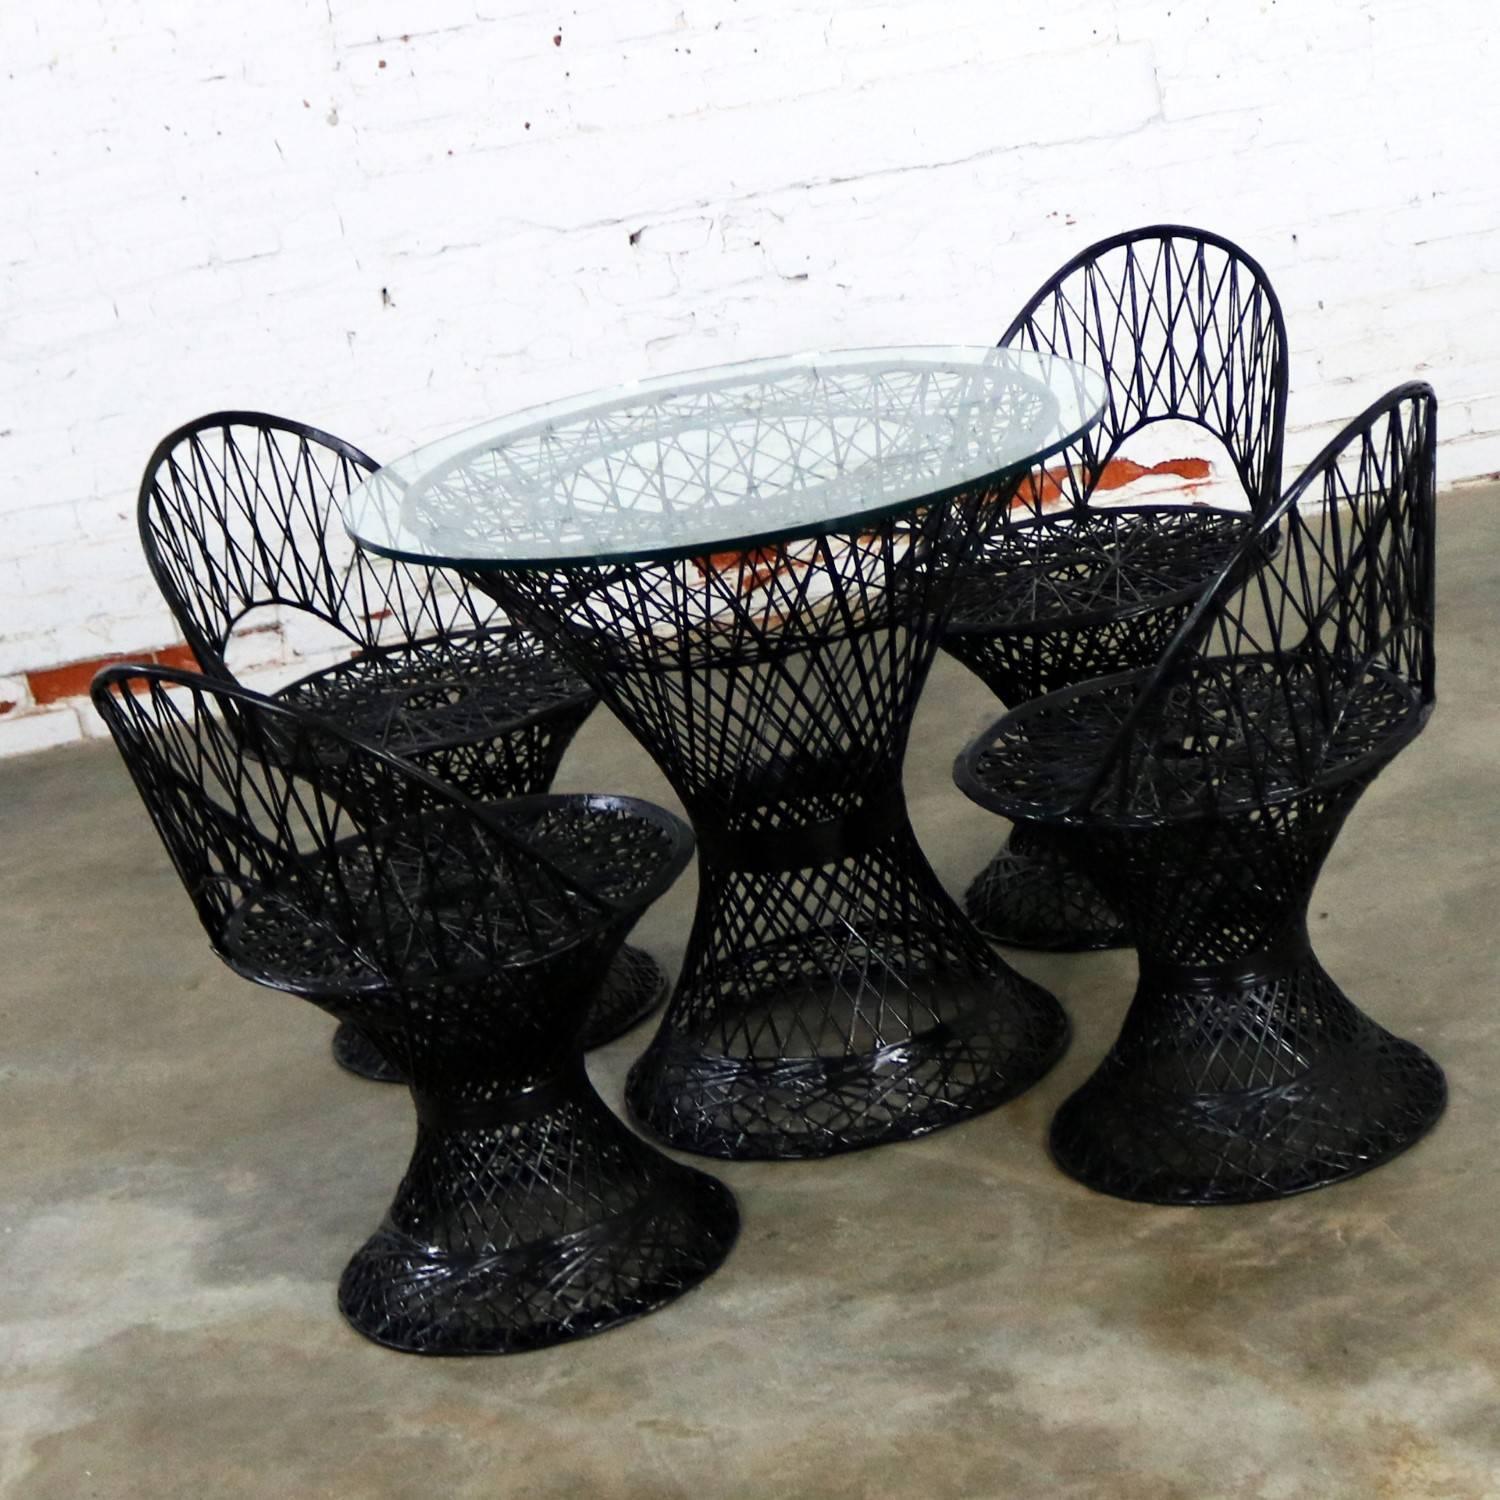 Handsome outdoor spun fiberglass patio table and four chairs designed by Russell Woodard and produced by Woodard Furniture, circa 1960s. This set is very sturdy and has been freshly painted in black which is an attractive departure from the usual